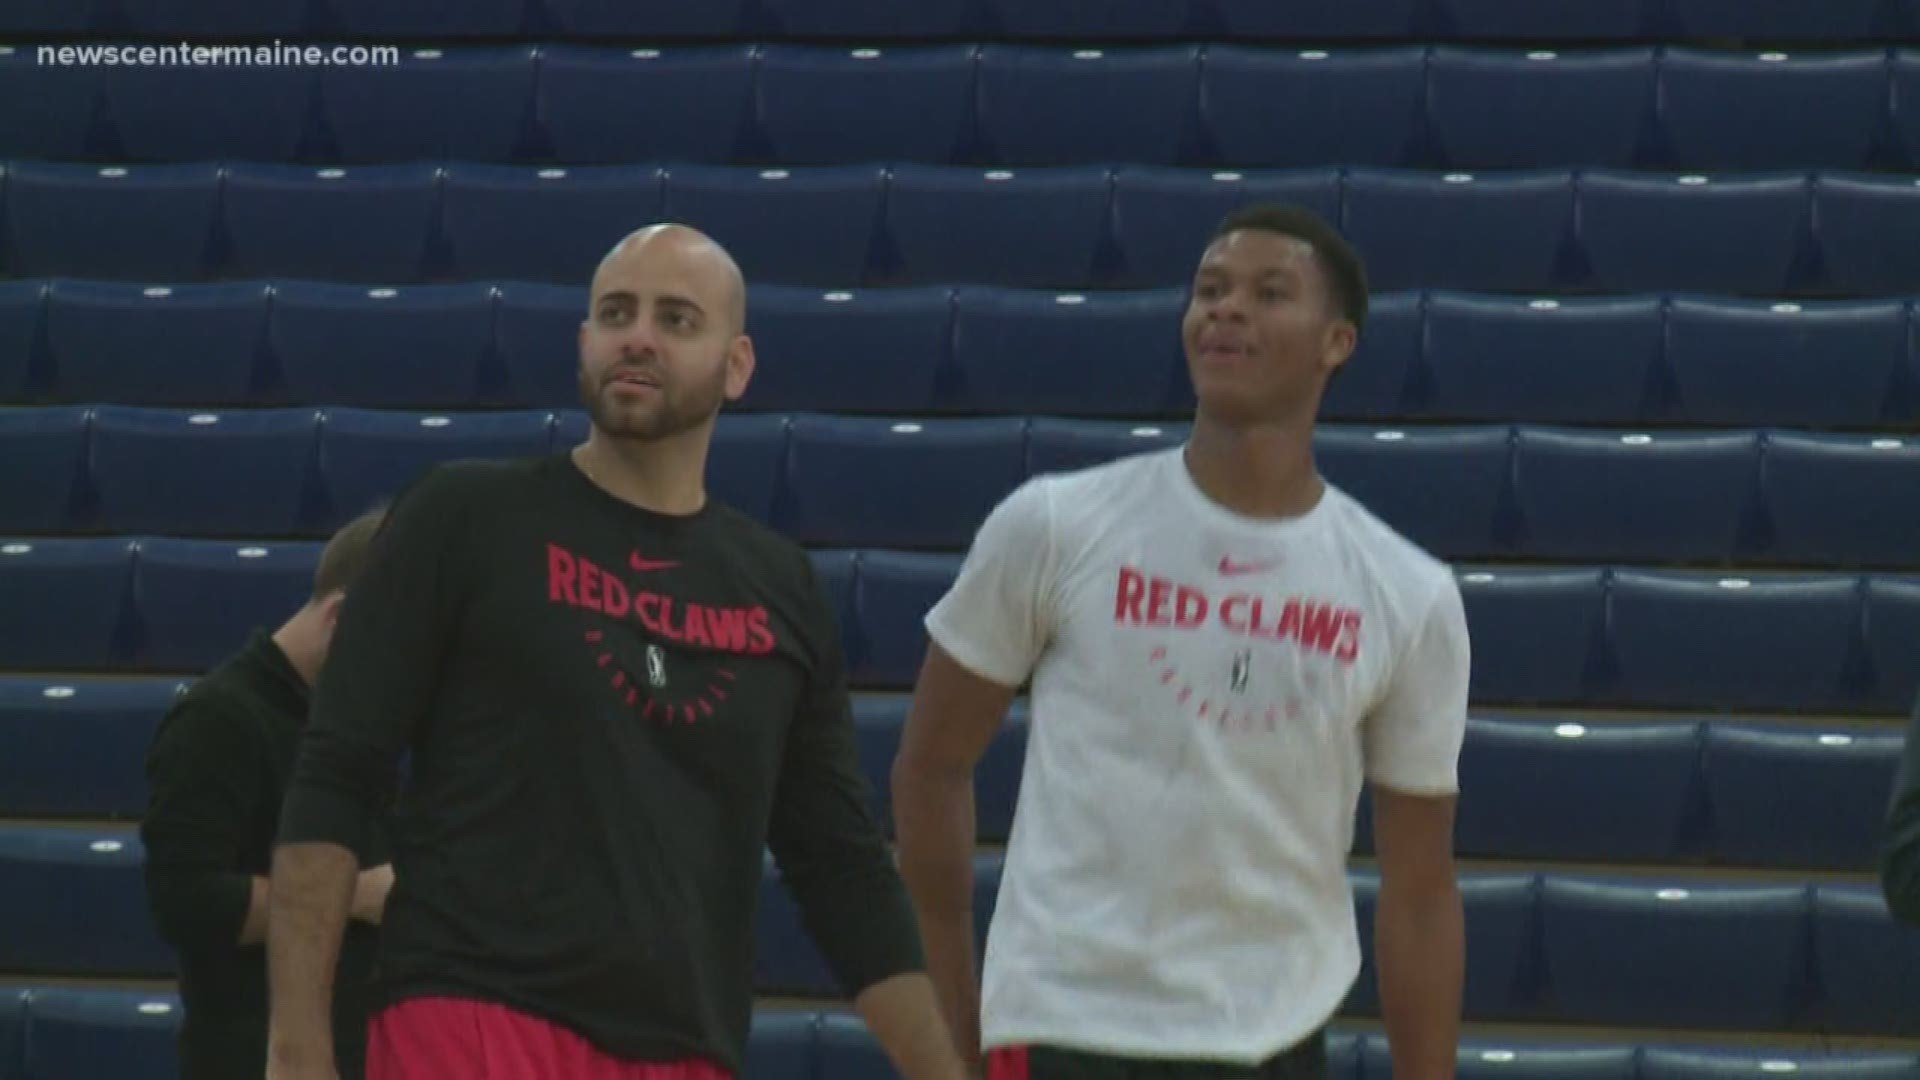 The Red Claws get down to work at their first practice of the 2018-2019 season to improve on their losing record of the previous season